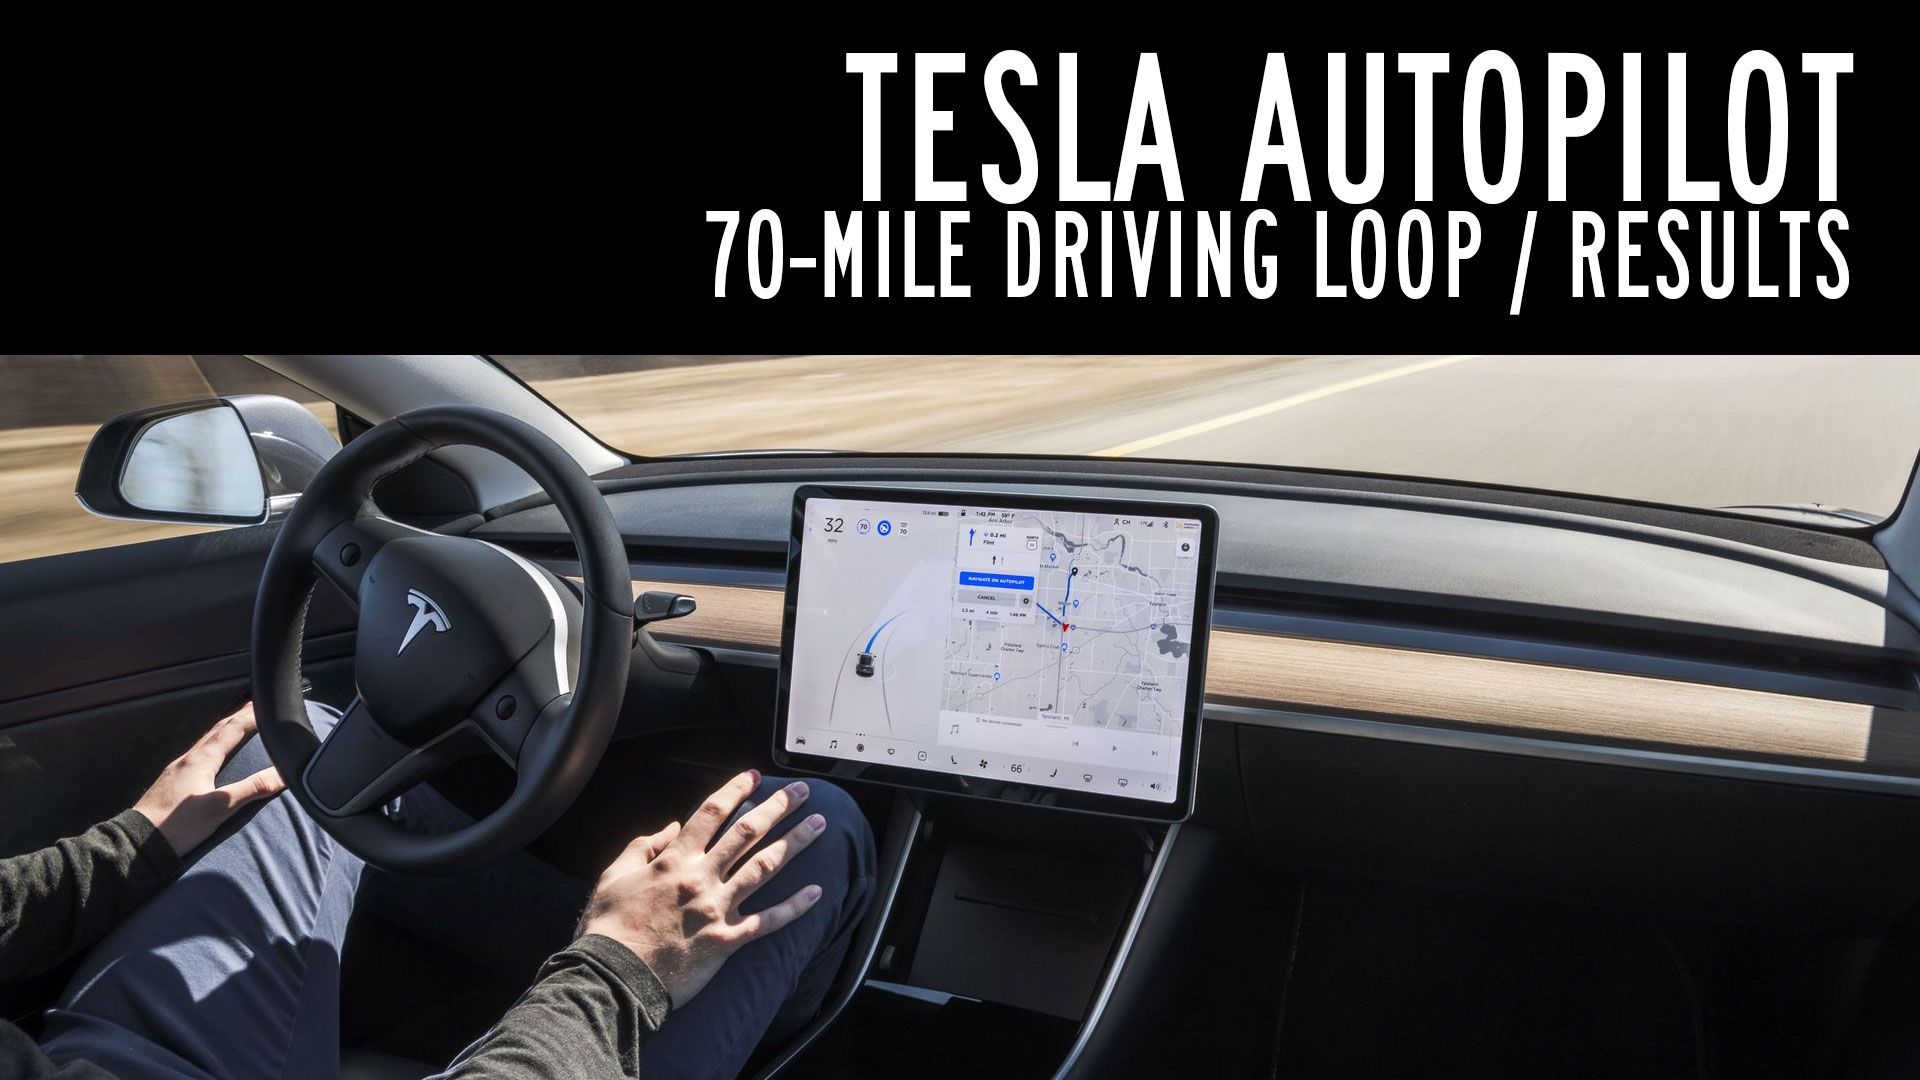 Report: Tesla Autopilot Involved in 736 Crashes since 2019